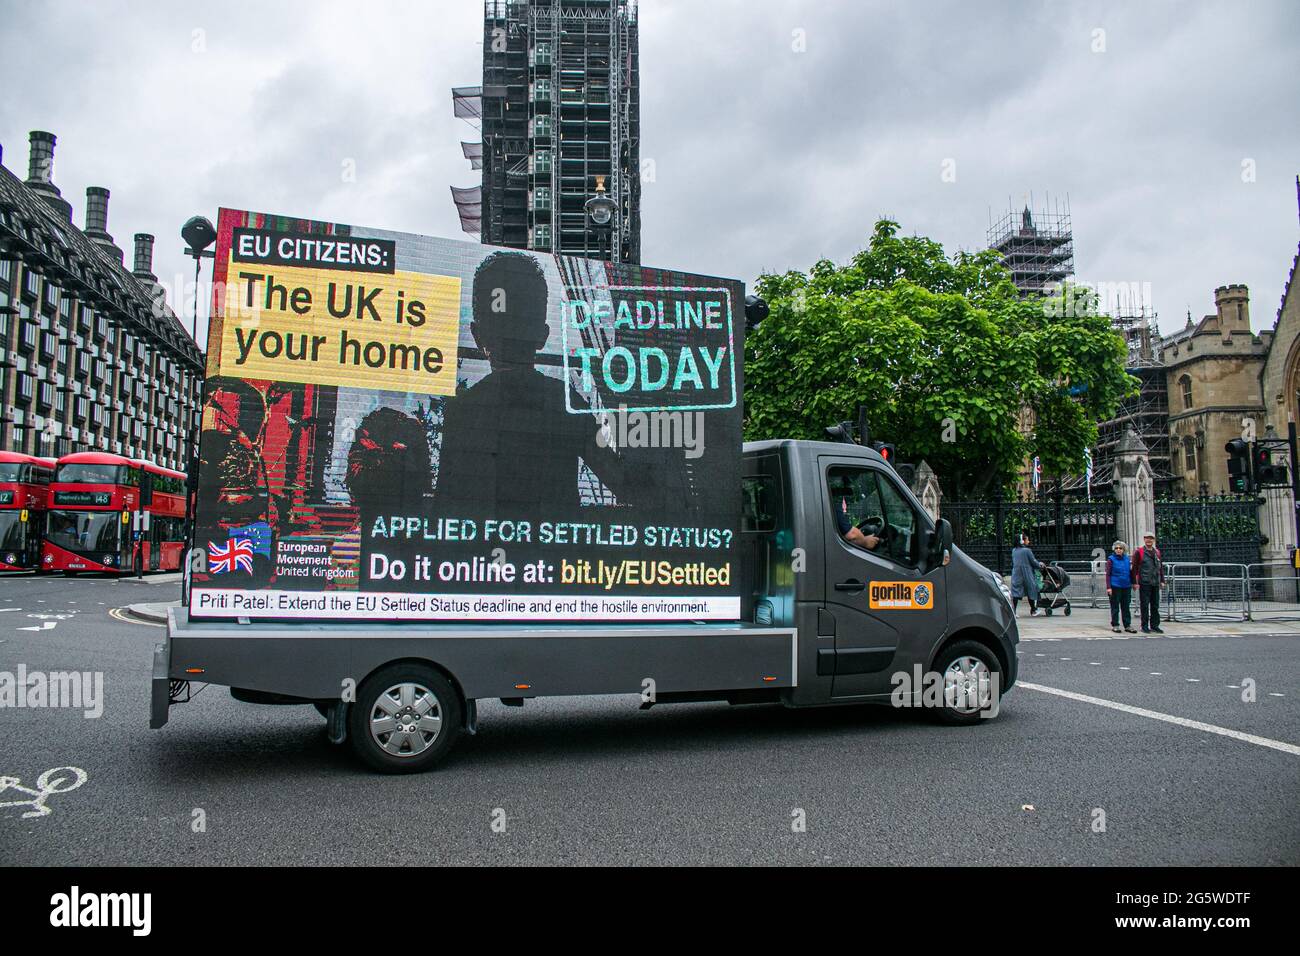 WESTMINSTER LONDON 30 June 2021.  A van driving around Westminster carrying an electronic message as today is the deadline for EU citizens living in the United Kingdom  to apply  for post-Brexit residency and settled status under the government's EU Settlement Scheme which ends  at midnight. Credit amer ghazzal/Alamy Live News Stock Photo